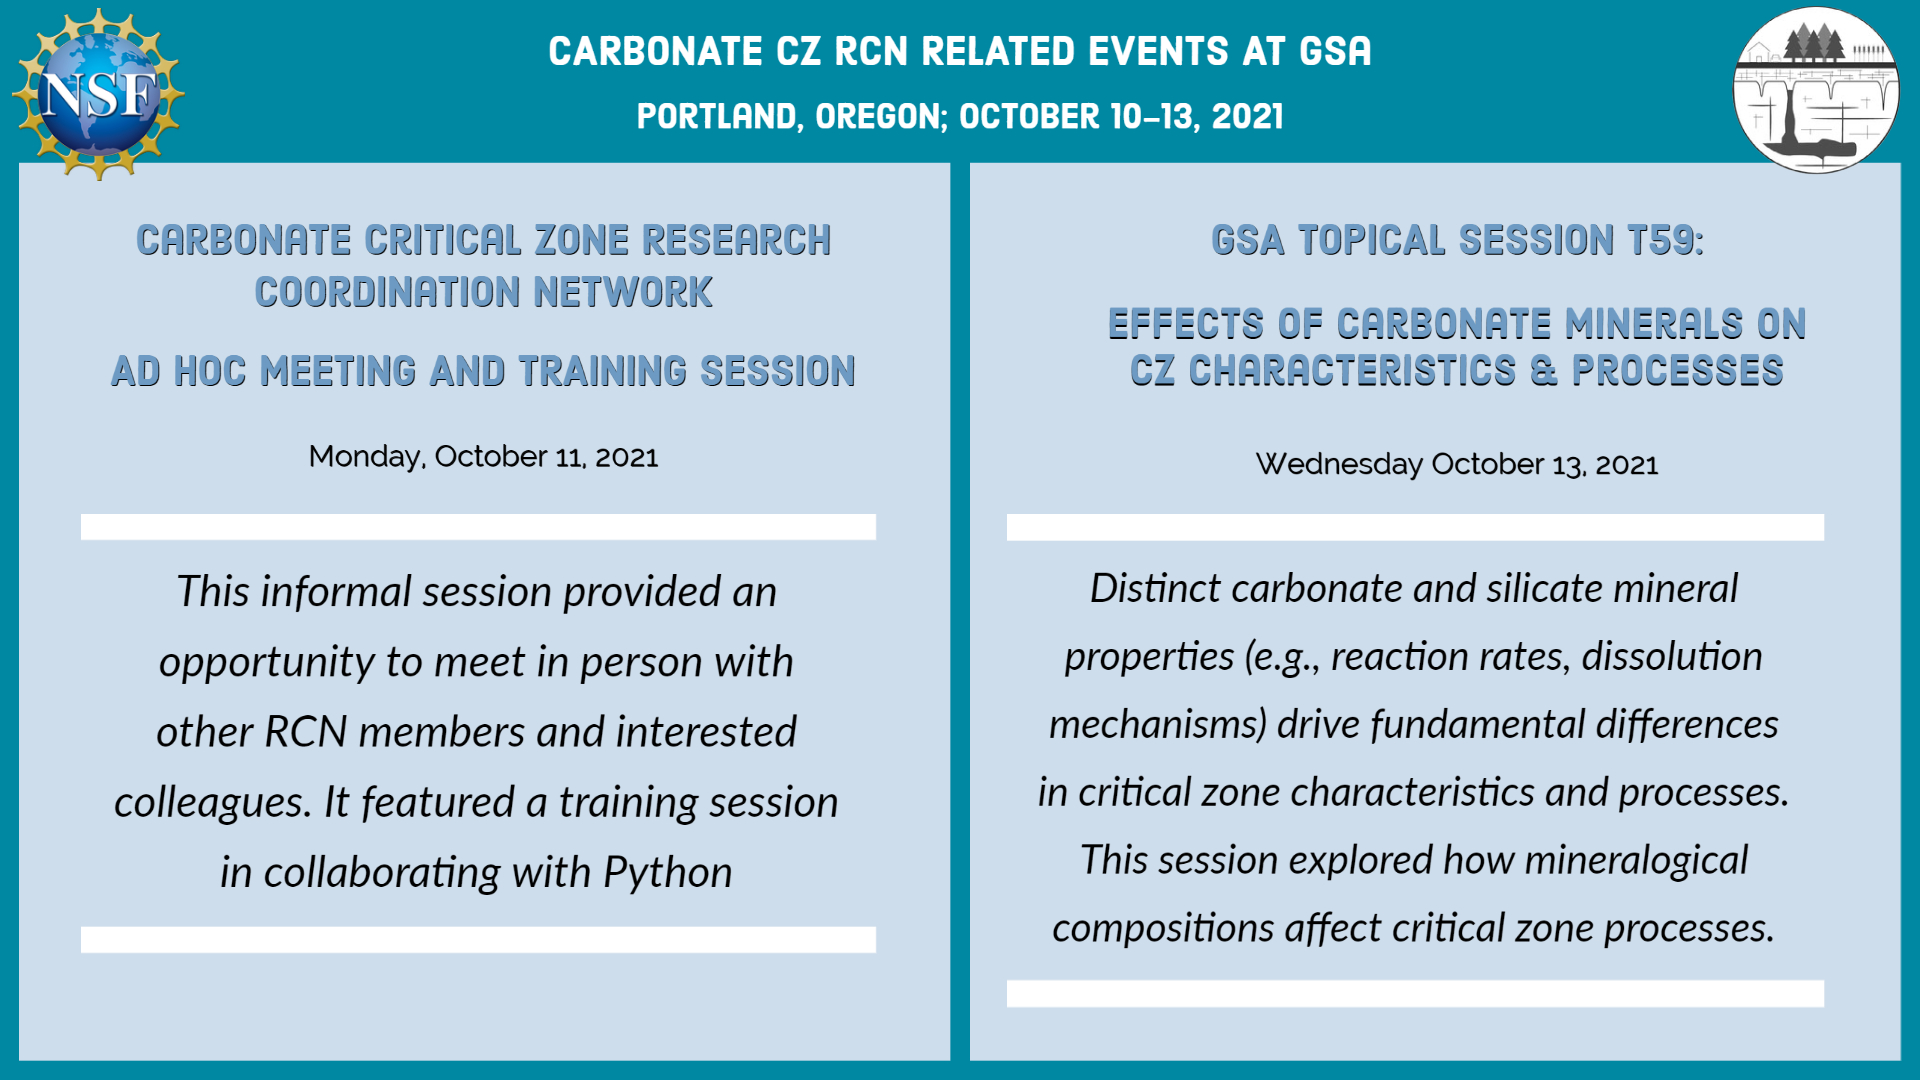 AD HOC MEETING AND TRAINING SESSION: This informal session provided an opportunity to meet in person with other RCN members and interested colleagues. It featured a training session in collaborating with Python GSA Topical session T59:Effects of Carbonate Minerals on CZ Characteristics & Processes: Distinct carbonate and silicate mineral properties (e.g., reaction rates, dissolution mechanisms) drive fundamental differences in critical zone characteristics and processes. This session explored how mineralogical compositions affect critical zone processes.